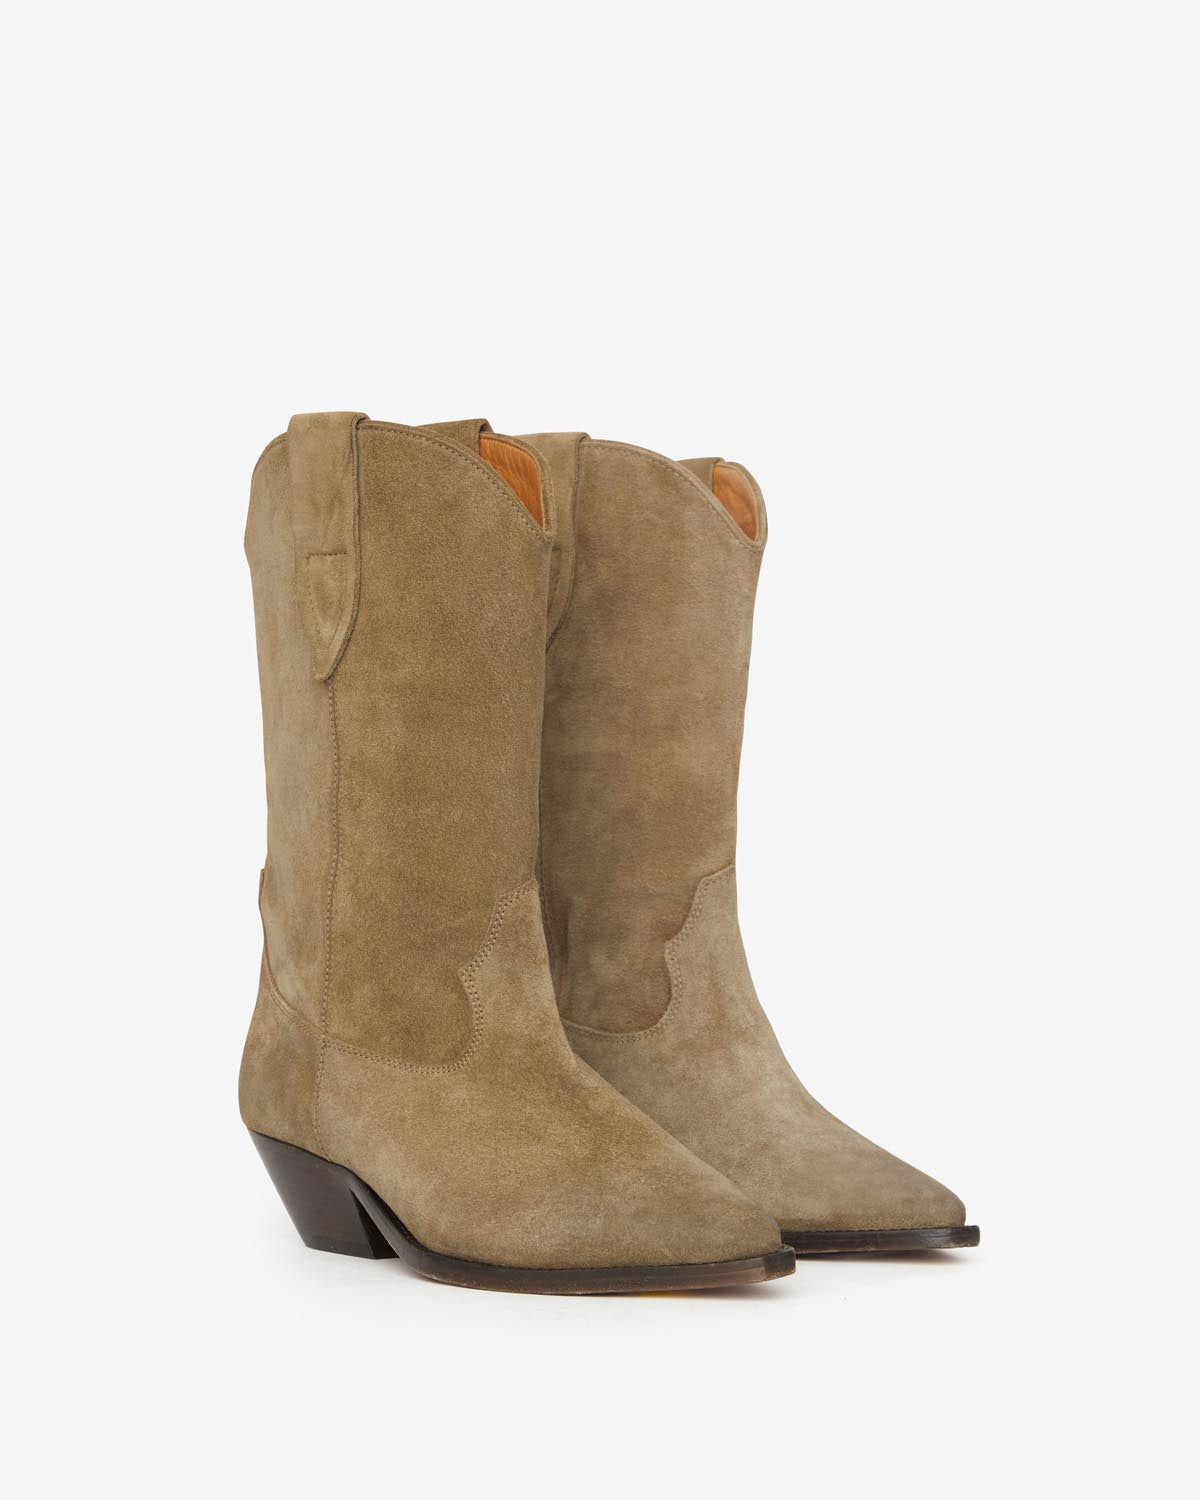 Stiefel duerto Woman Taupe 5